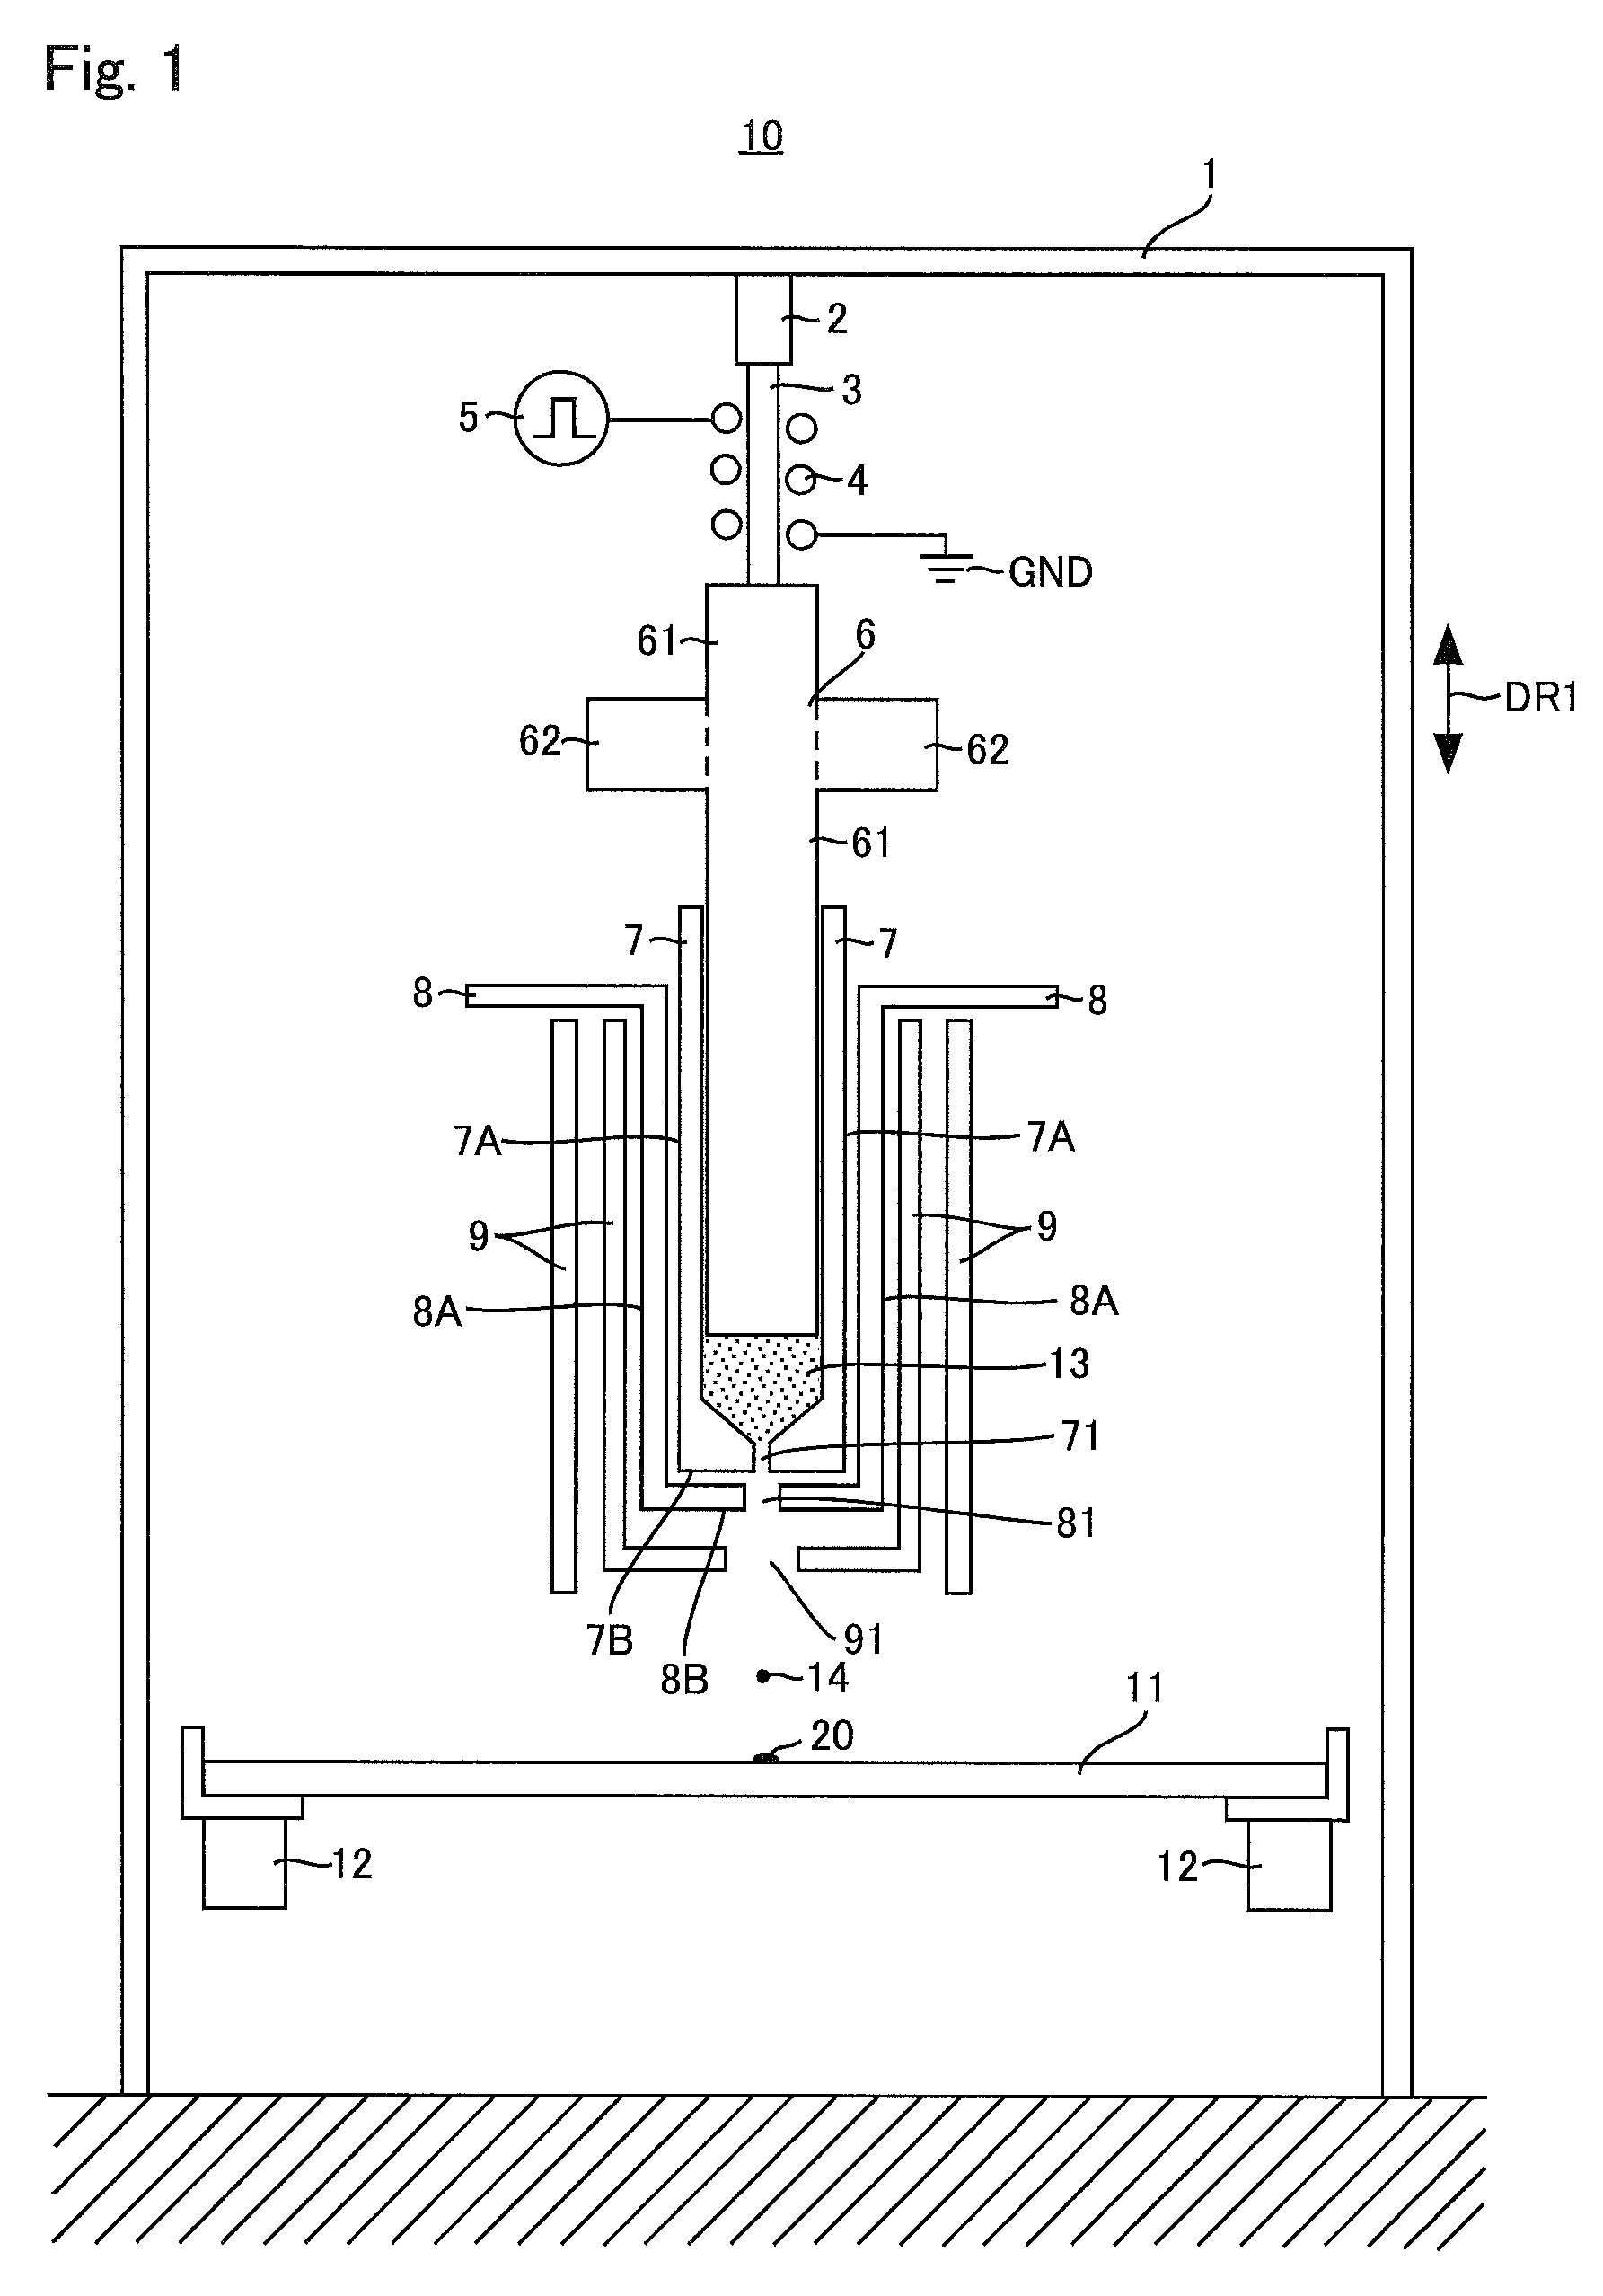 Crystal manufacturing apparatus, semiconductor device manufactured using the same, and method of manufacturing semiconductor device using the same